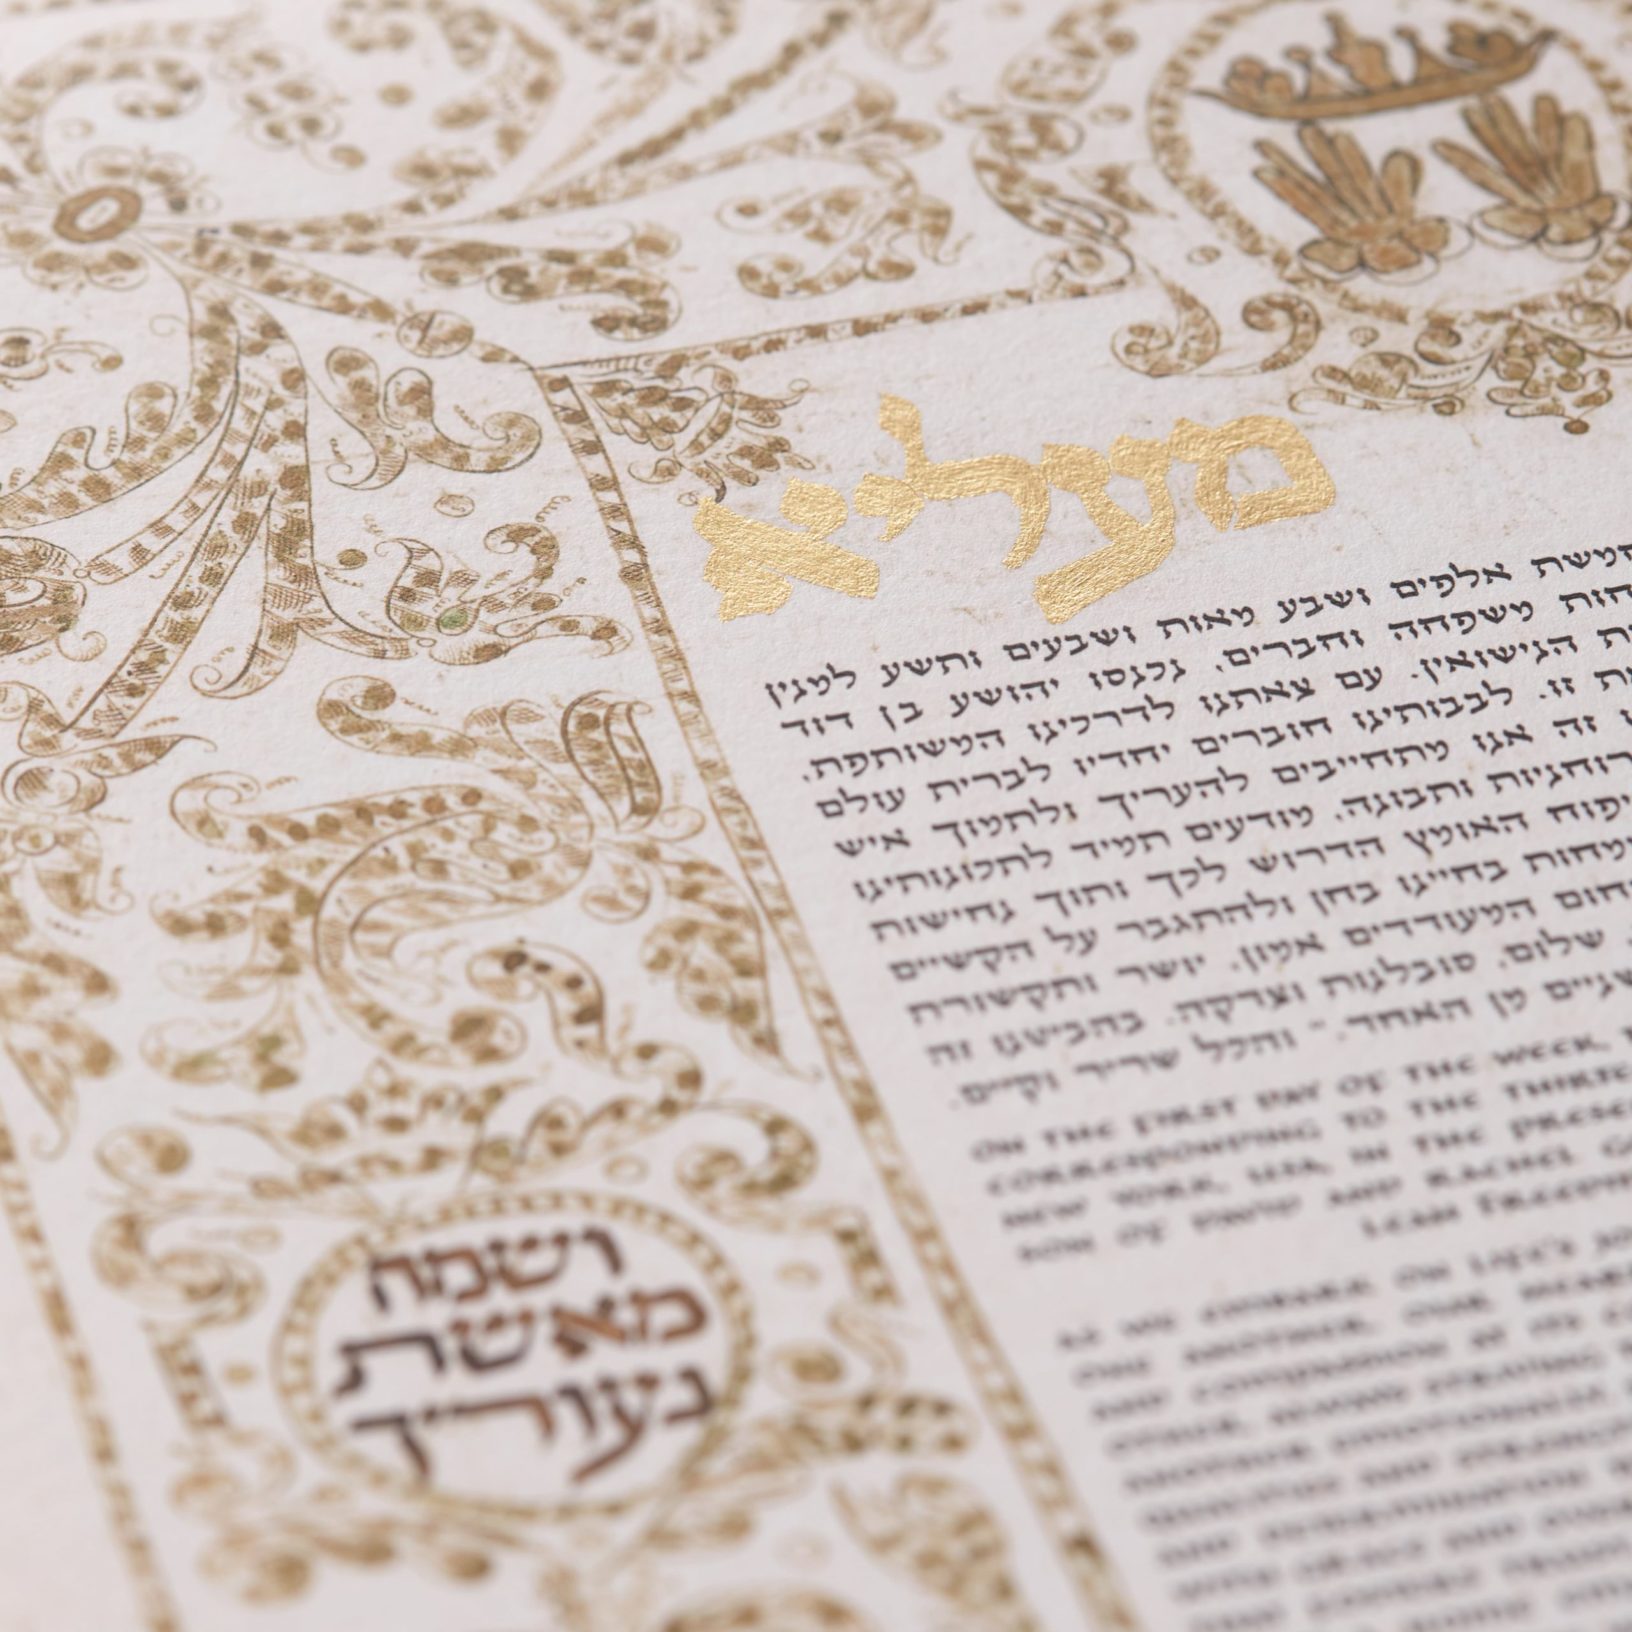 Monselice, Italy, 1659 - Gold Leaf Ketubah Designs by The Jewish Museum